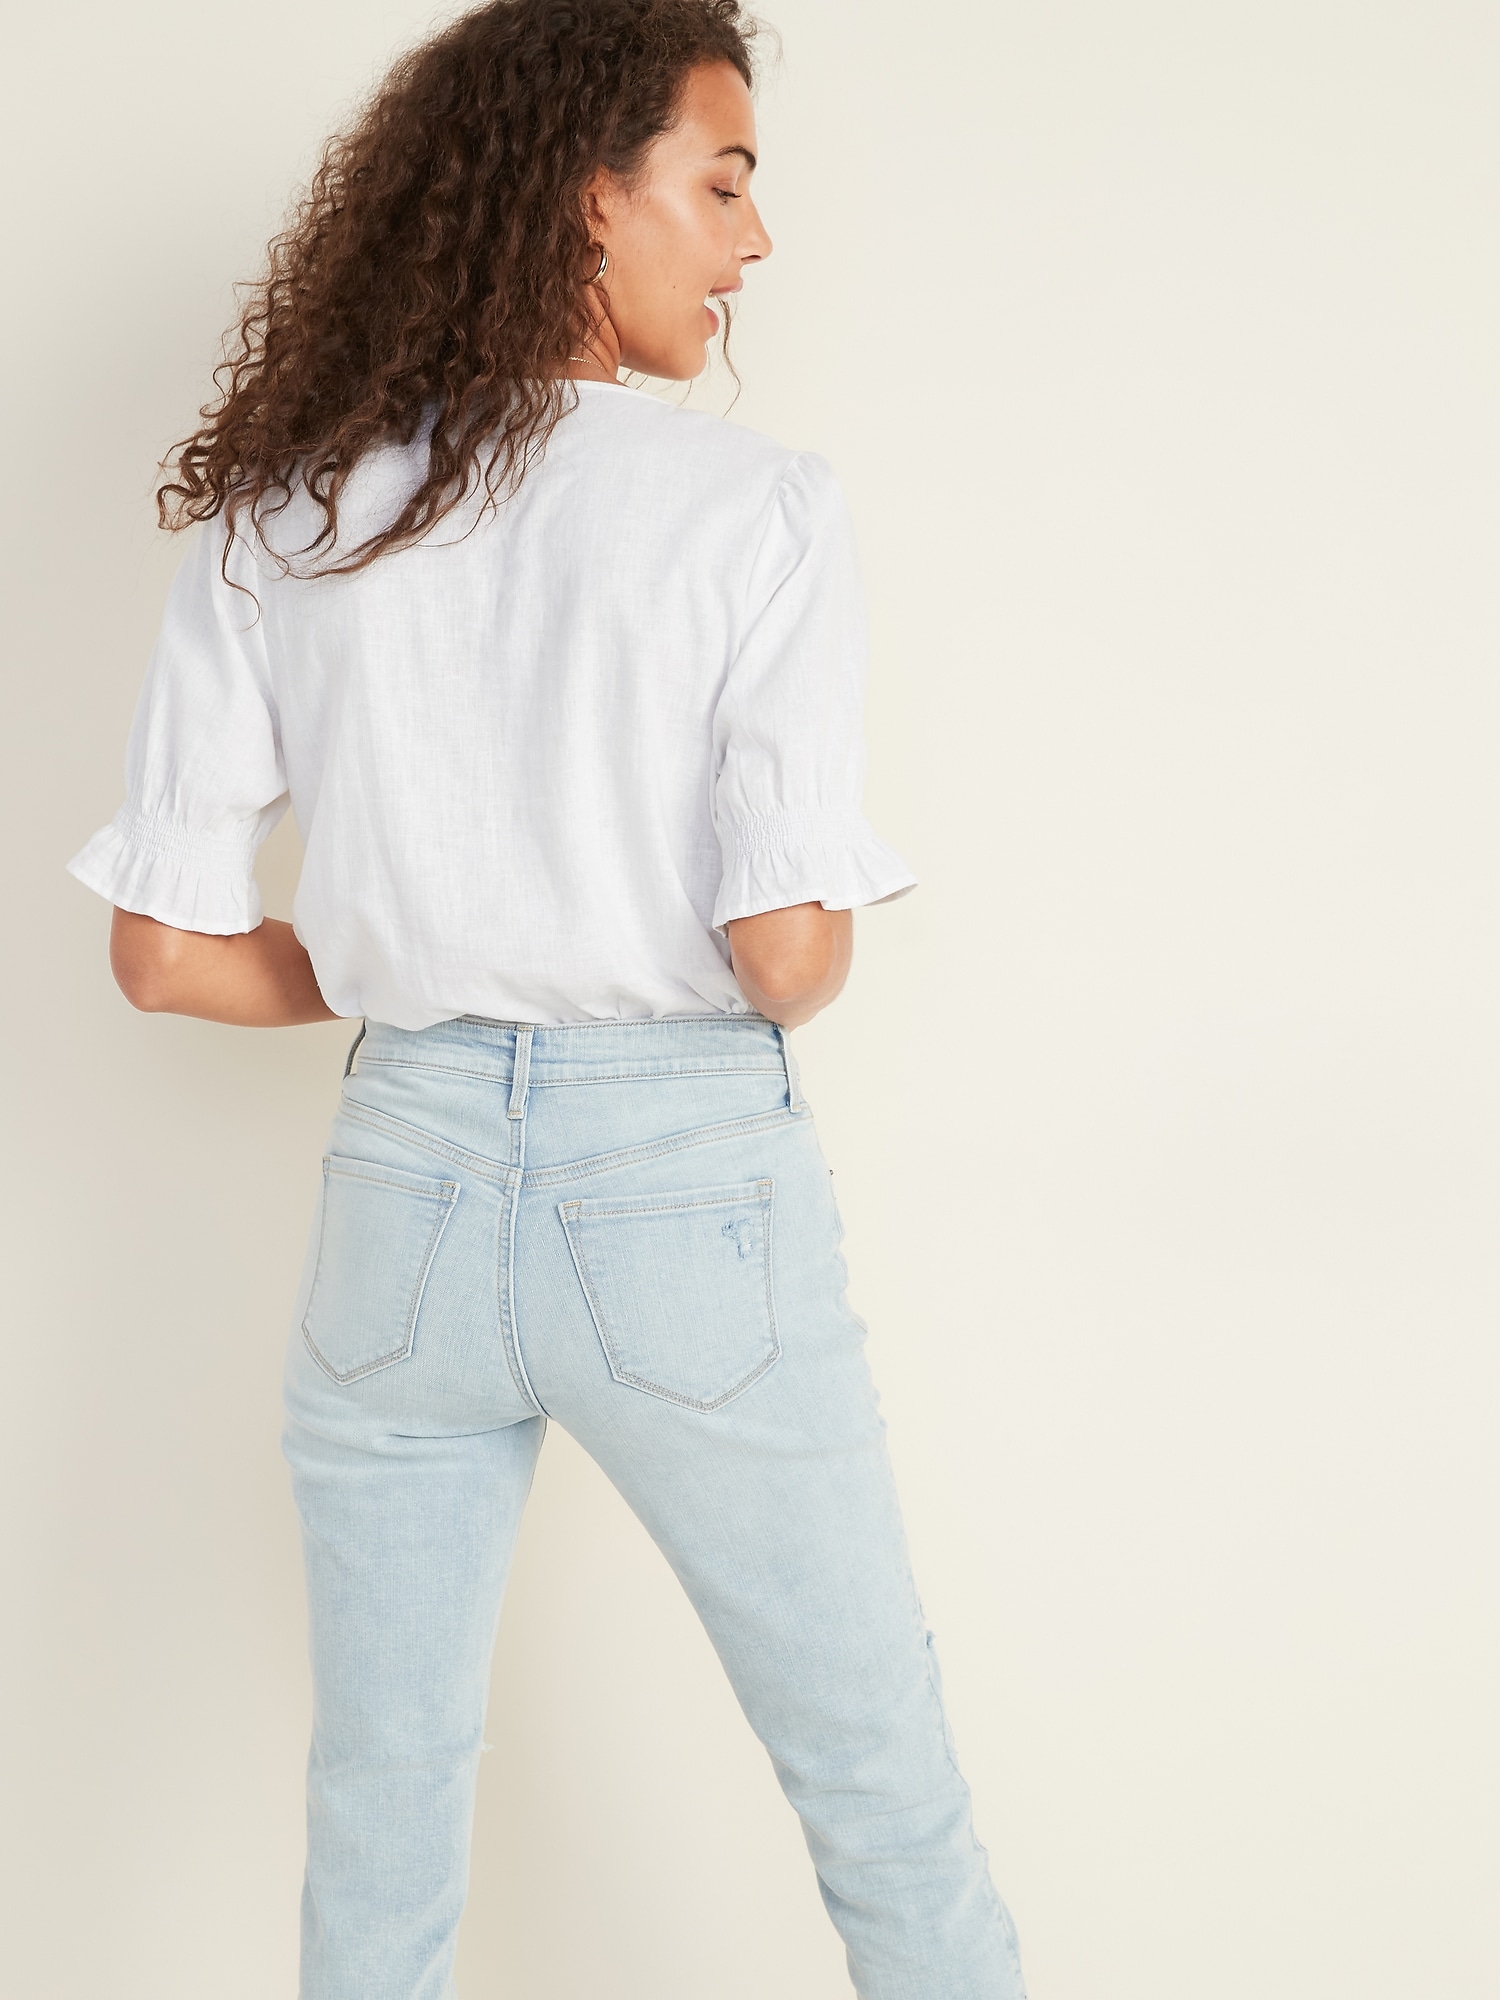 old navy high rise white jeans